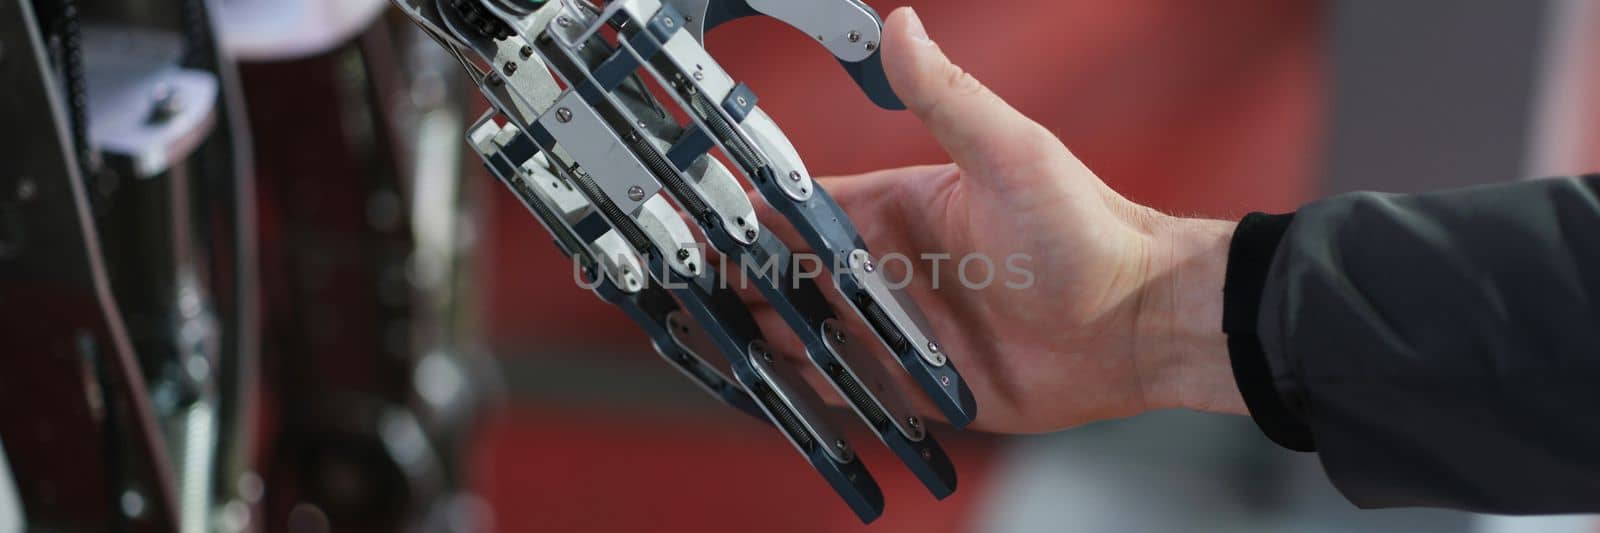 Robot extends its hand to man for handshake by kuprevich